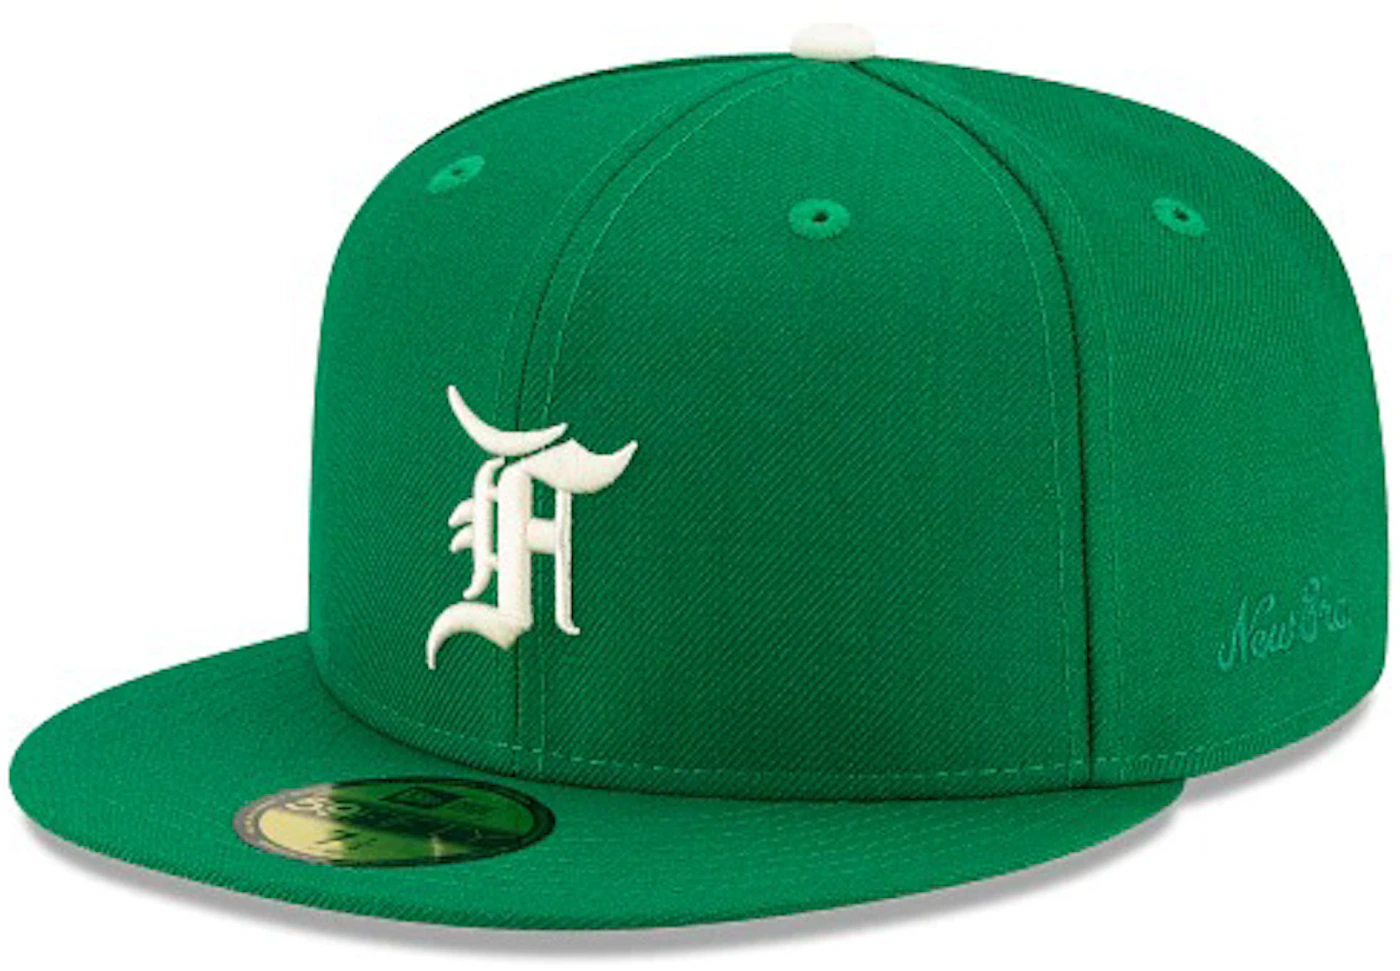 https://images.stockx.com/images/Fear-of-God-Eseentials-New-Era-59Fifty-Fitted-Hat-FW21-Kelly-Green.jpg?fit=fill&bg=FFFFFF&w=700&h=500&fm=webp&auto=compress&q=90&dpr=2&trim=color&updated_at=1629495728